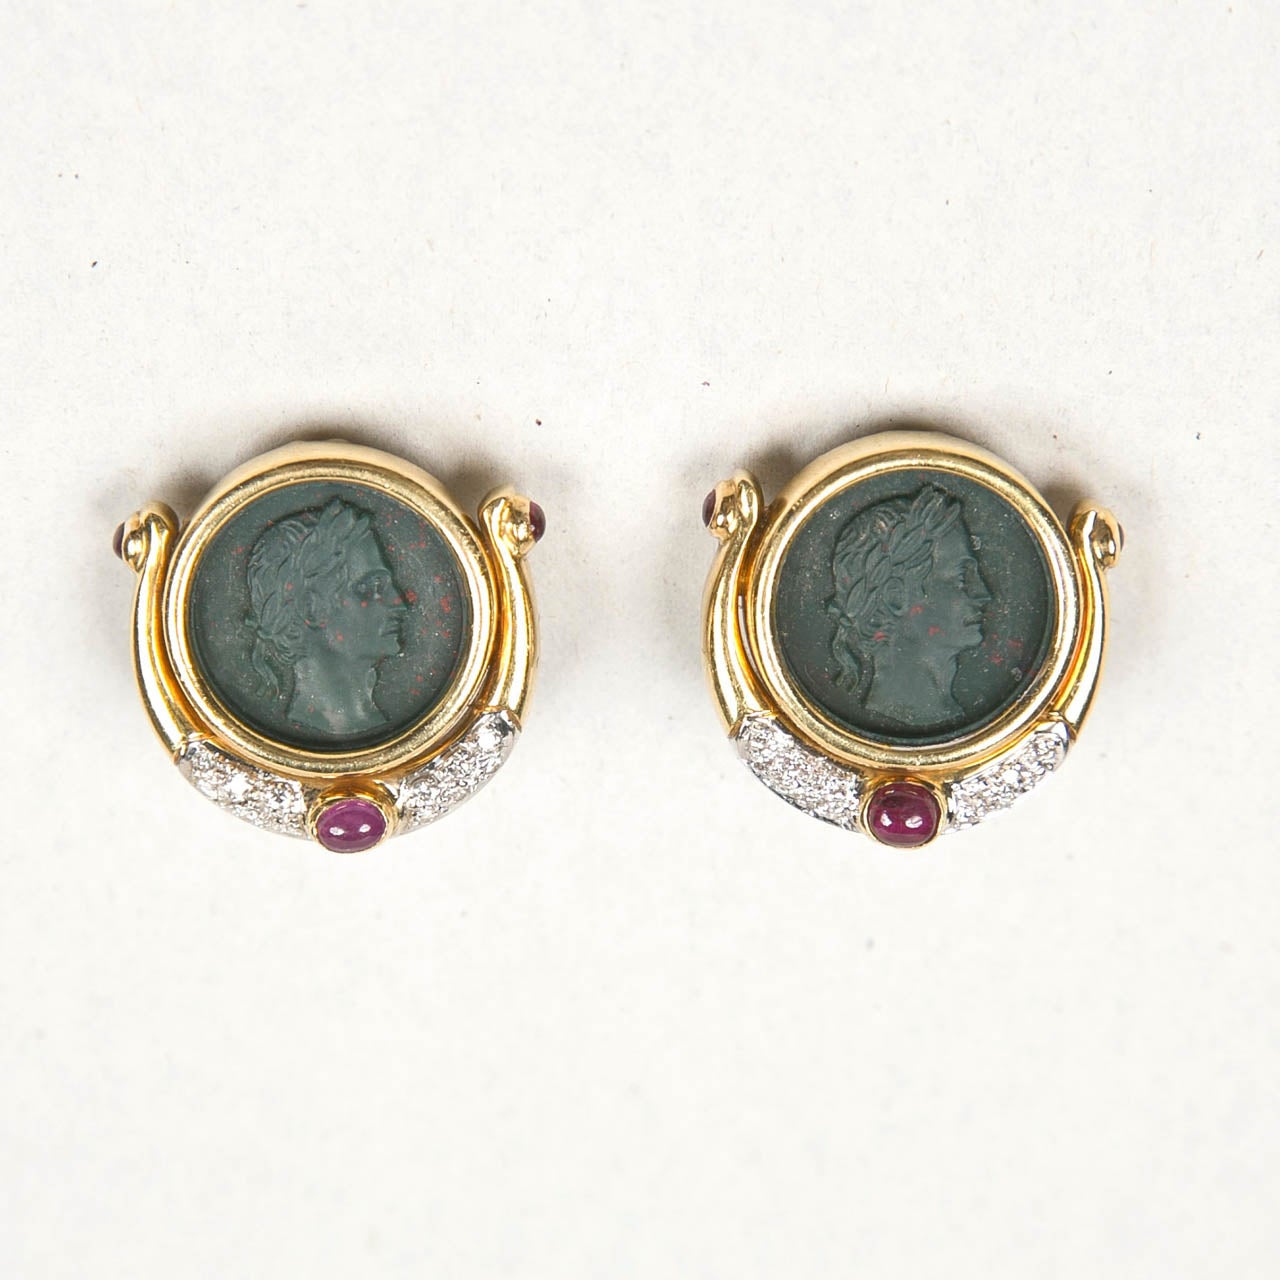 Ancient Roman Italian coin clip earrings set in gold with pave diamond and cabochon rubies.